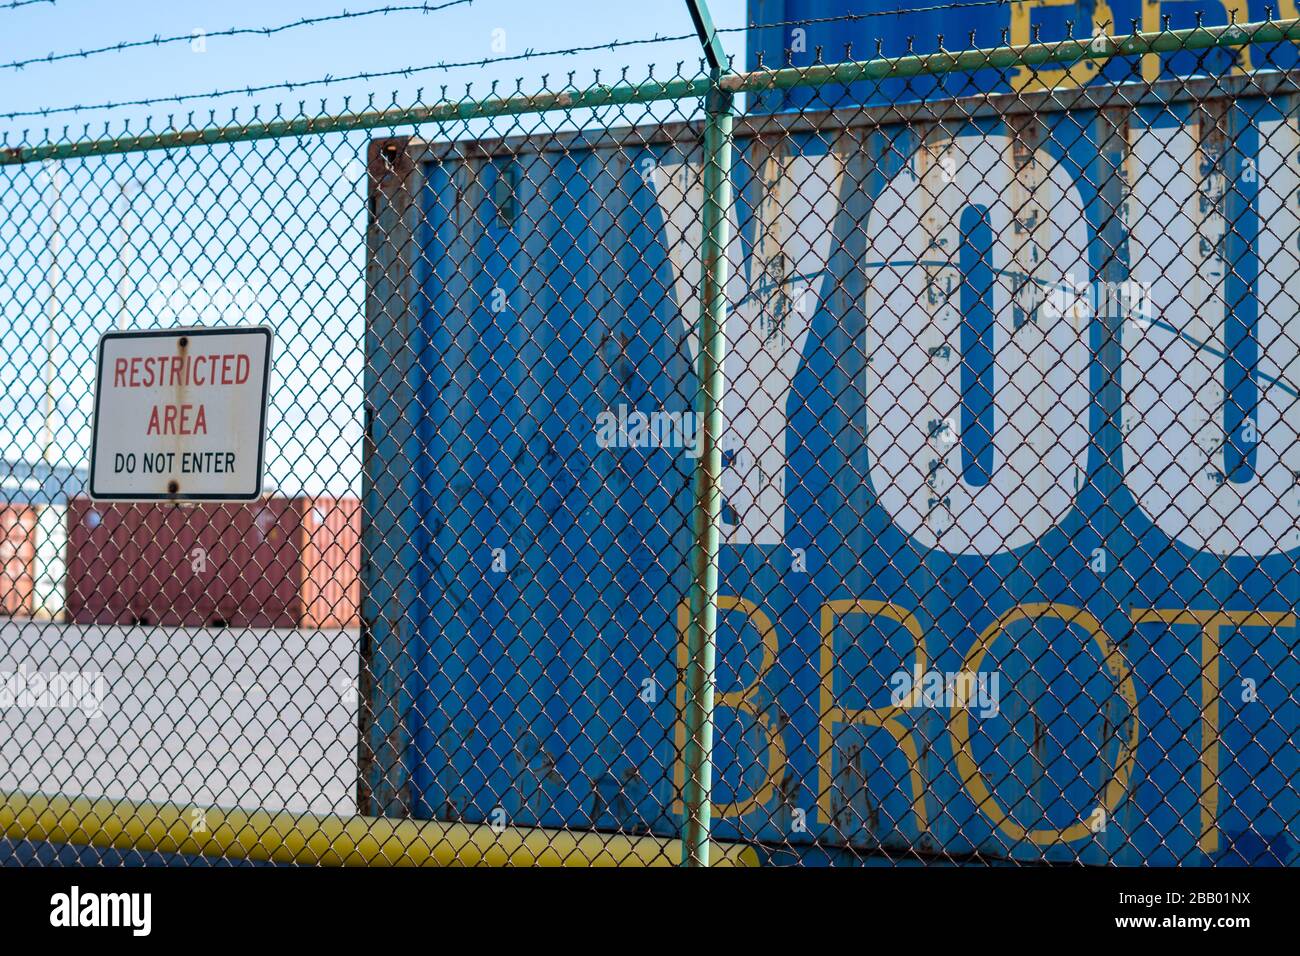 Shipping Containers in Maui, Hawaii during Covid-19 Pandemic Stock Photo